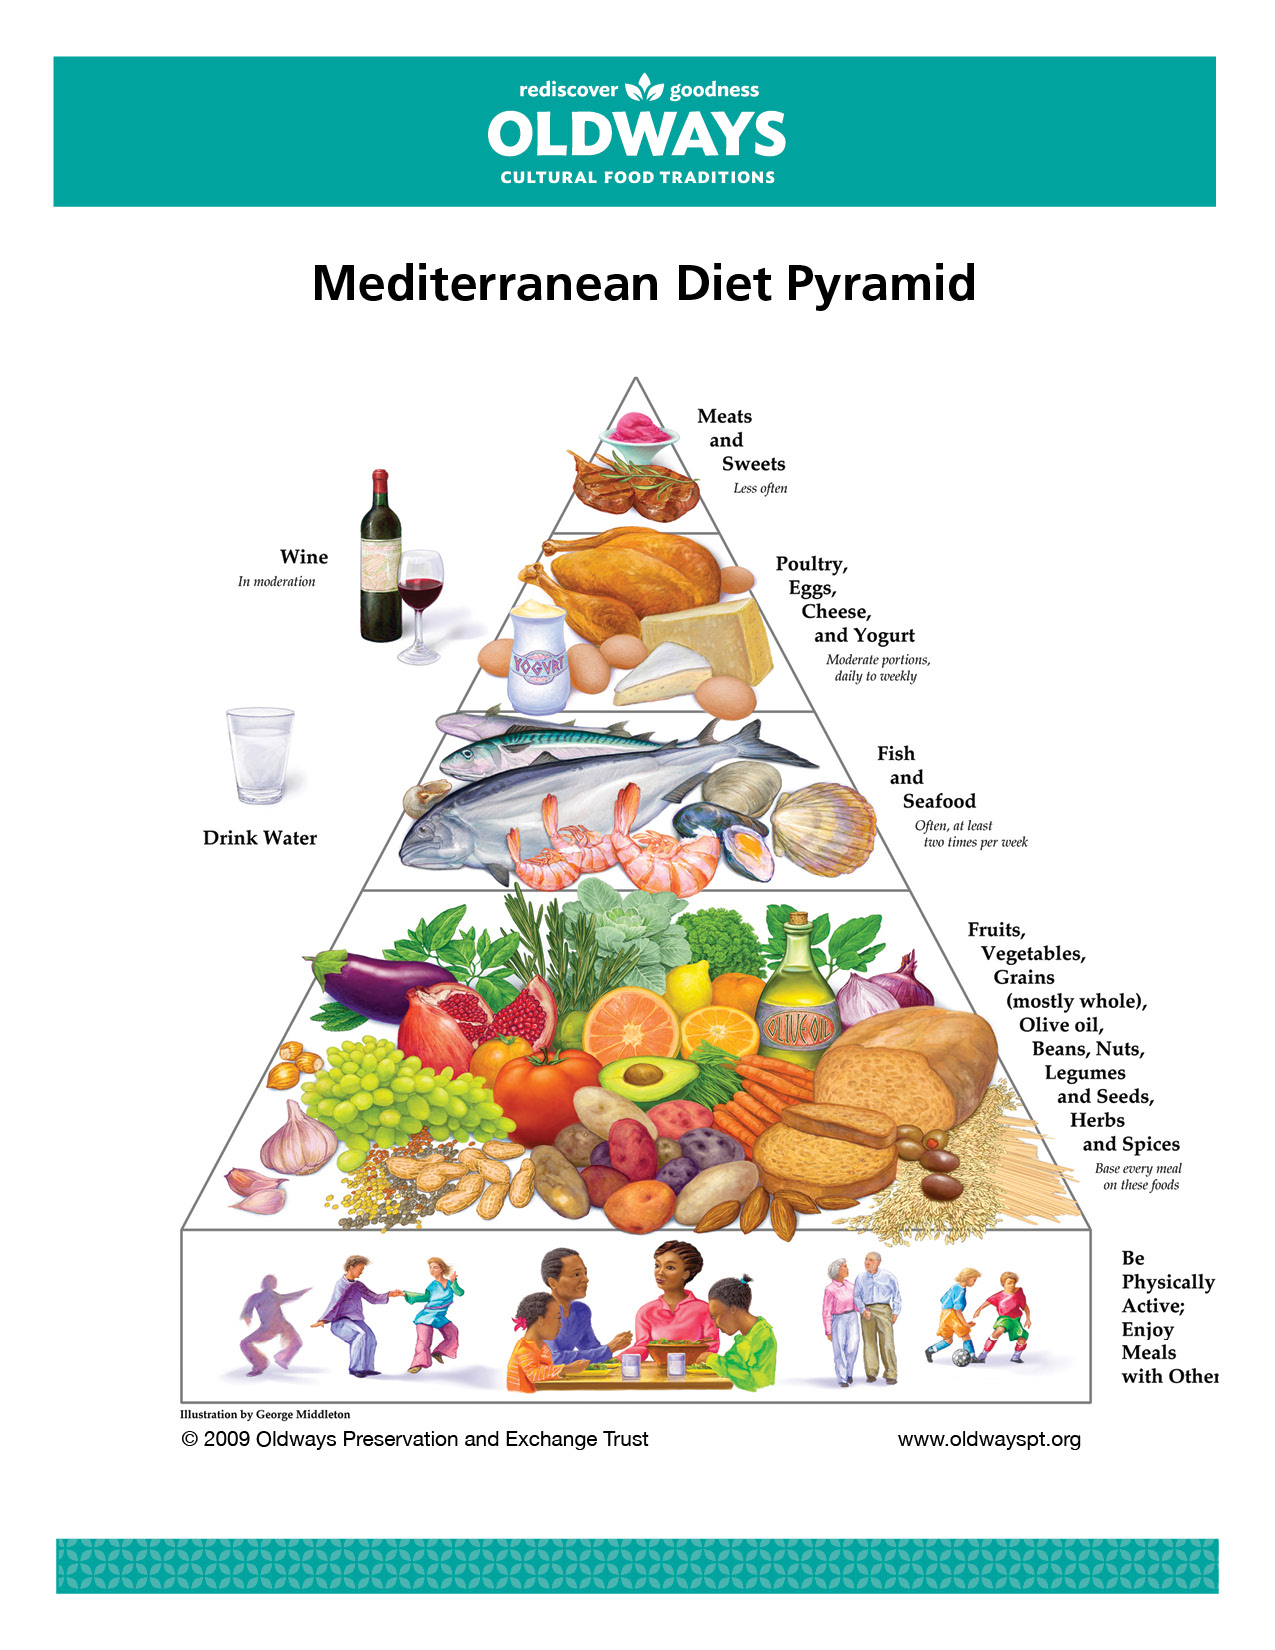 How To Get Started With A Mediterranean Diet